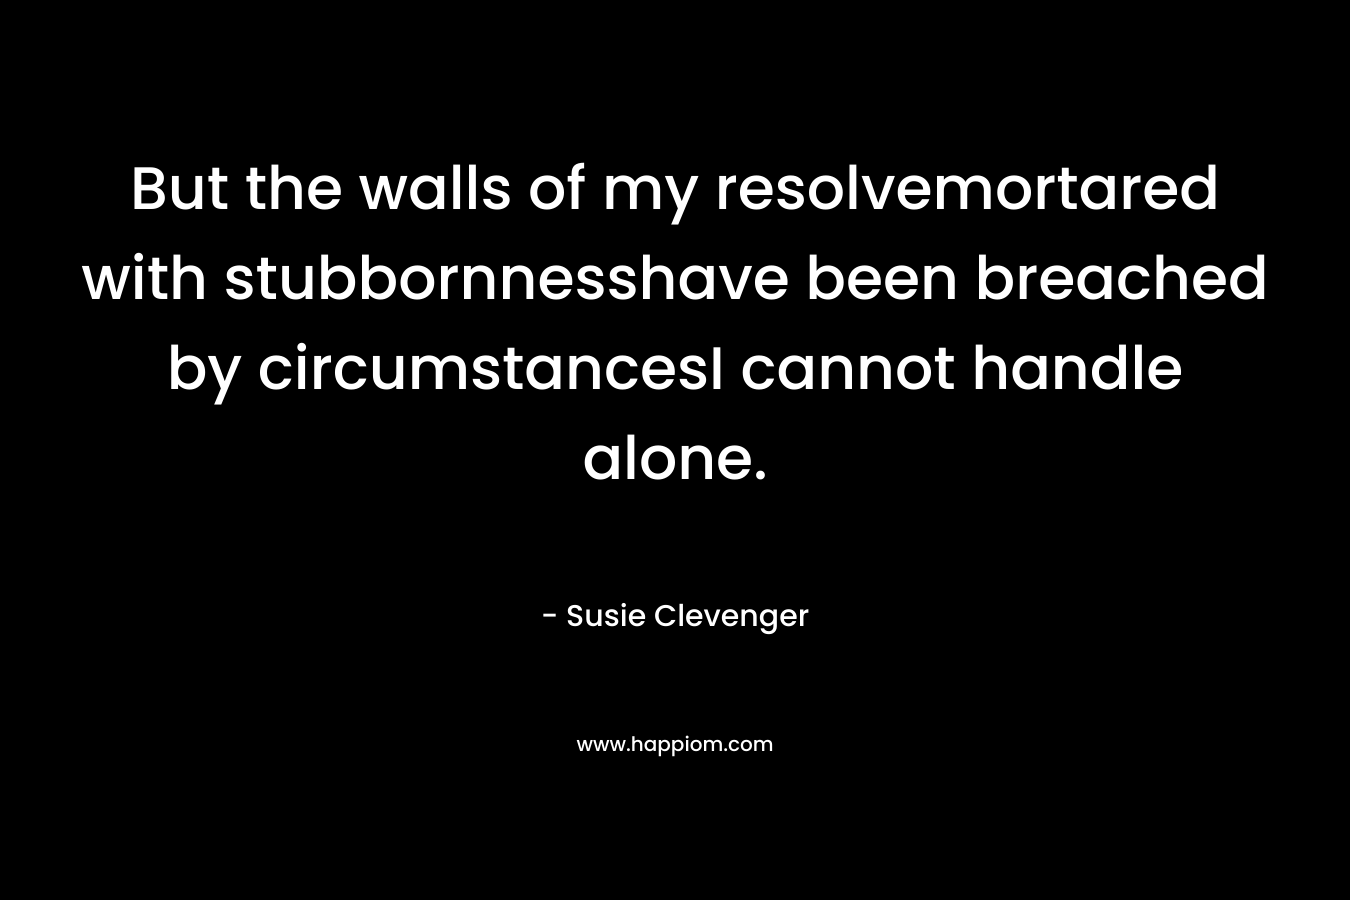 But the walls of my resolvemortared with stubbornnesshave been breached by circumstancesI cannot handle alone.